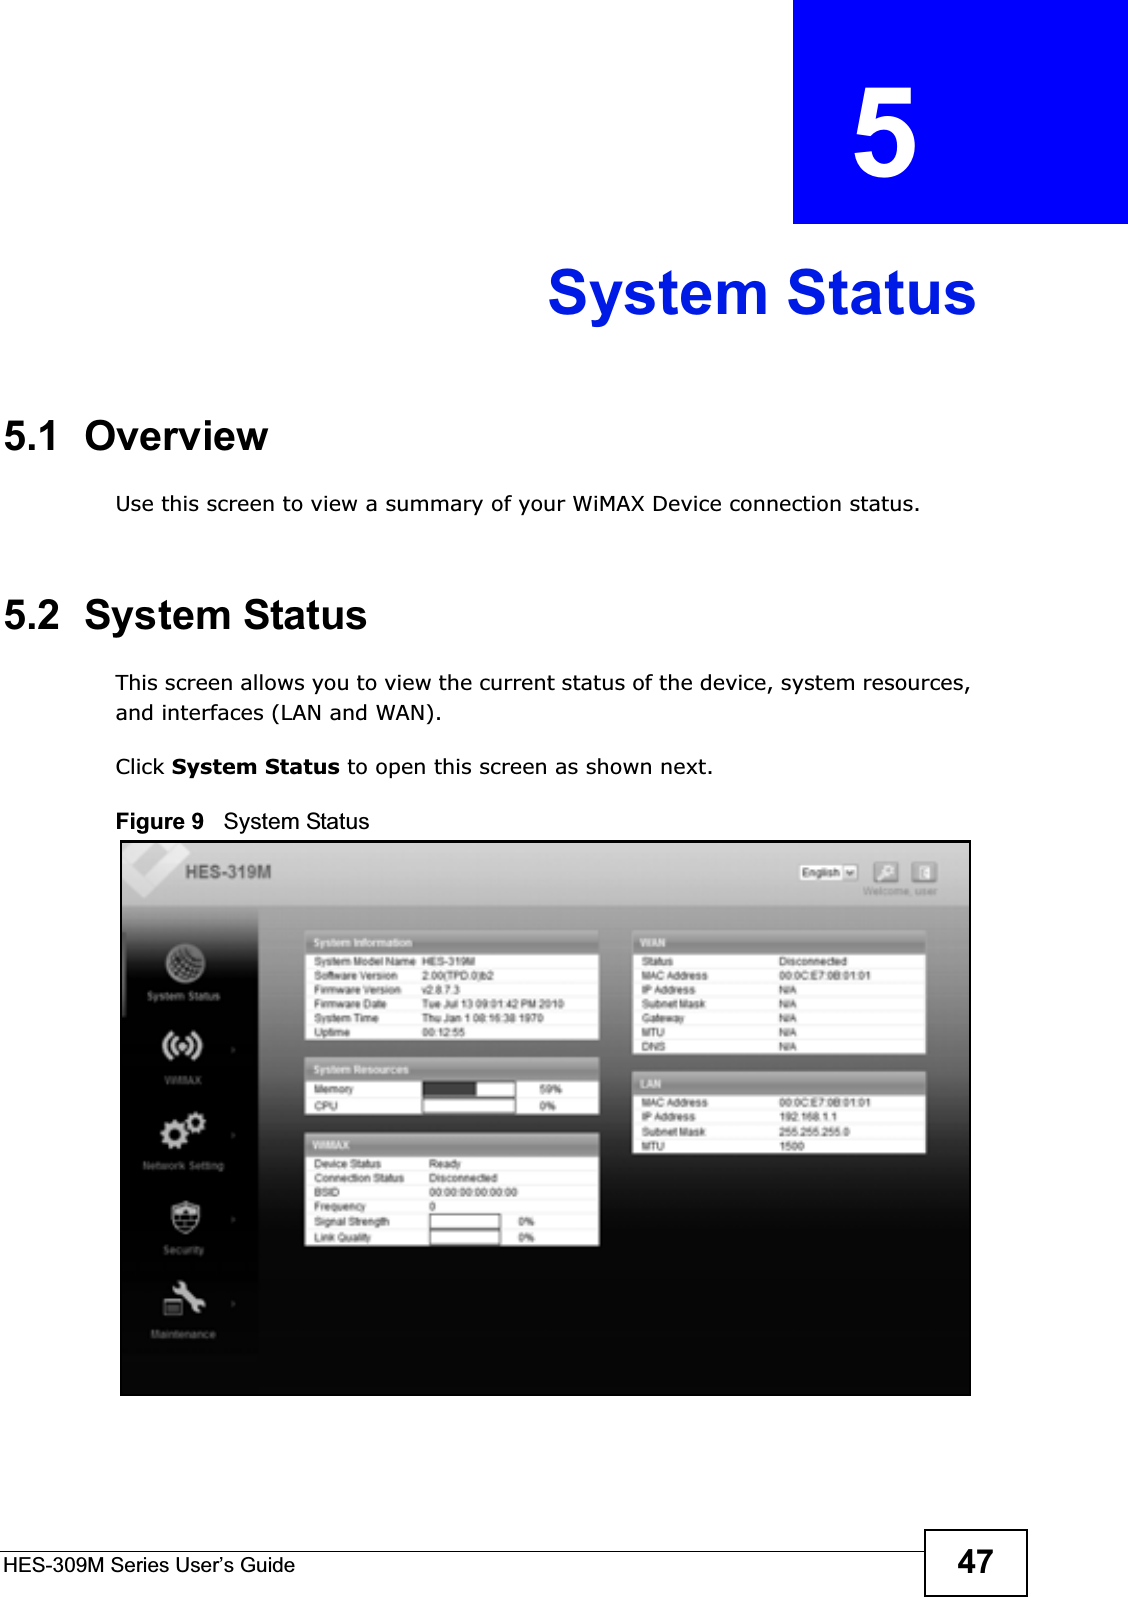 HES-309M Series User’s Guide 47CHAPTER  5 System Status5.1  OverviewUse this screen to view a summary of your WiMAX Device connection status.5.2  System StatusThis screen allows you to view the current status of the device, system resources, and interfaces (LAN and WAN).Click System Status to open this screen as shown next.Figure 9   System Status